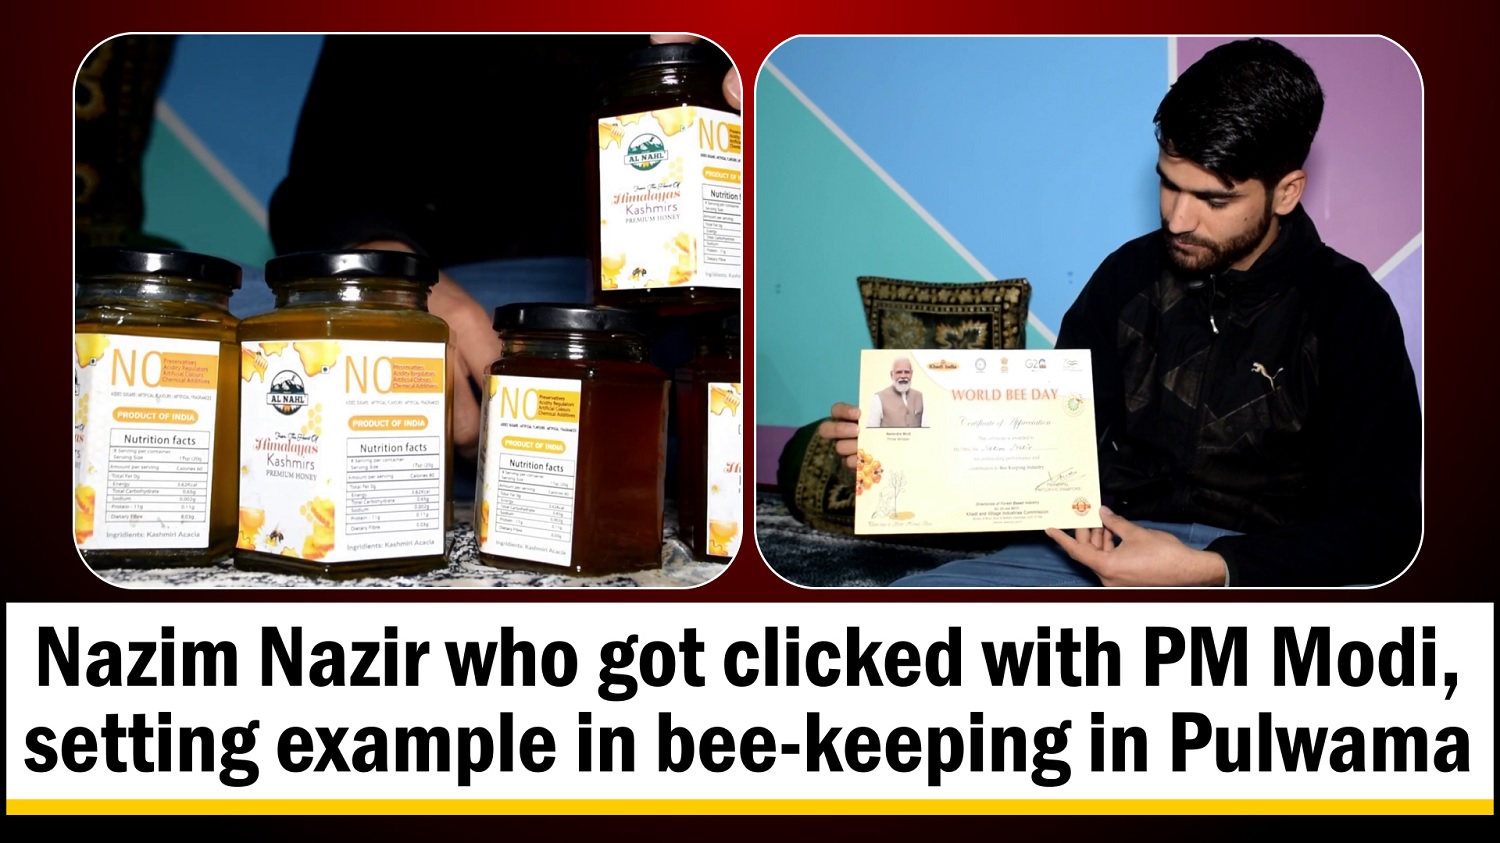 Nazim Nazir who got clicked with PM Narendra Modi, setting example in bee-keeping in Pulwama